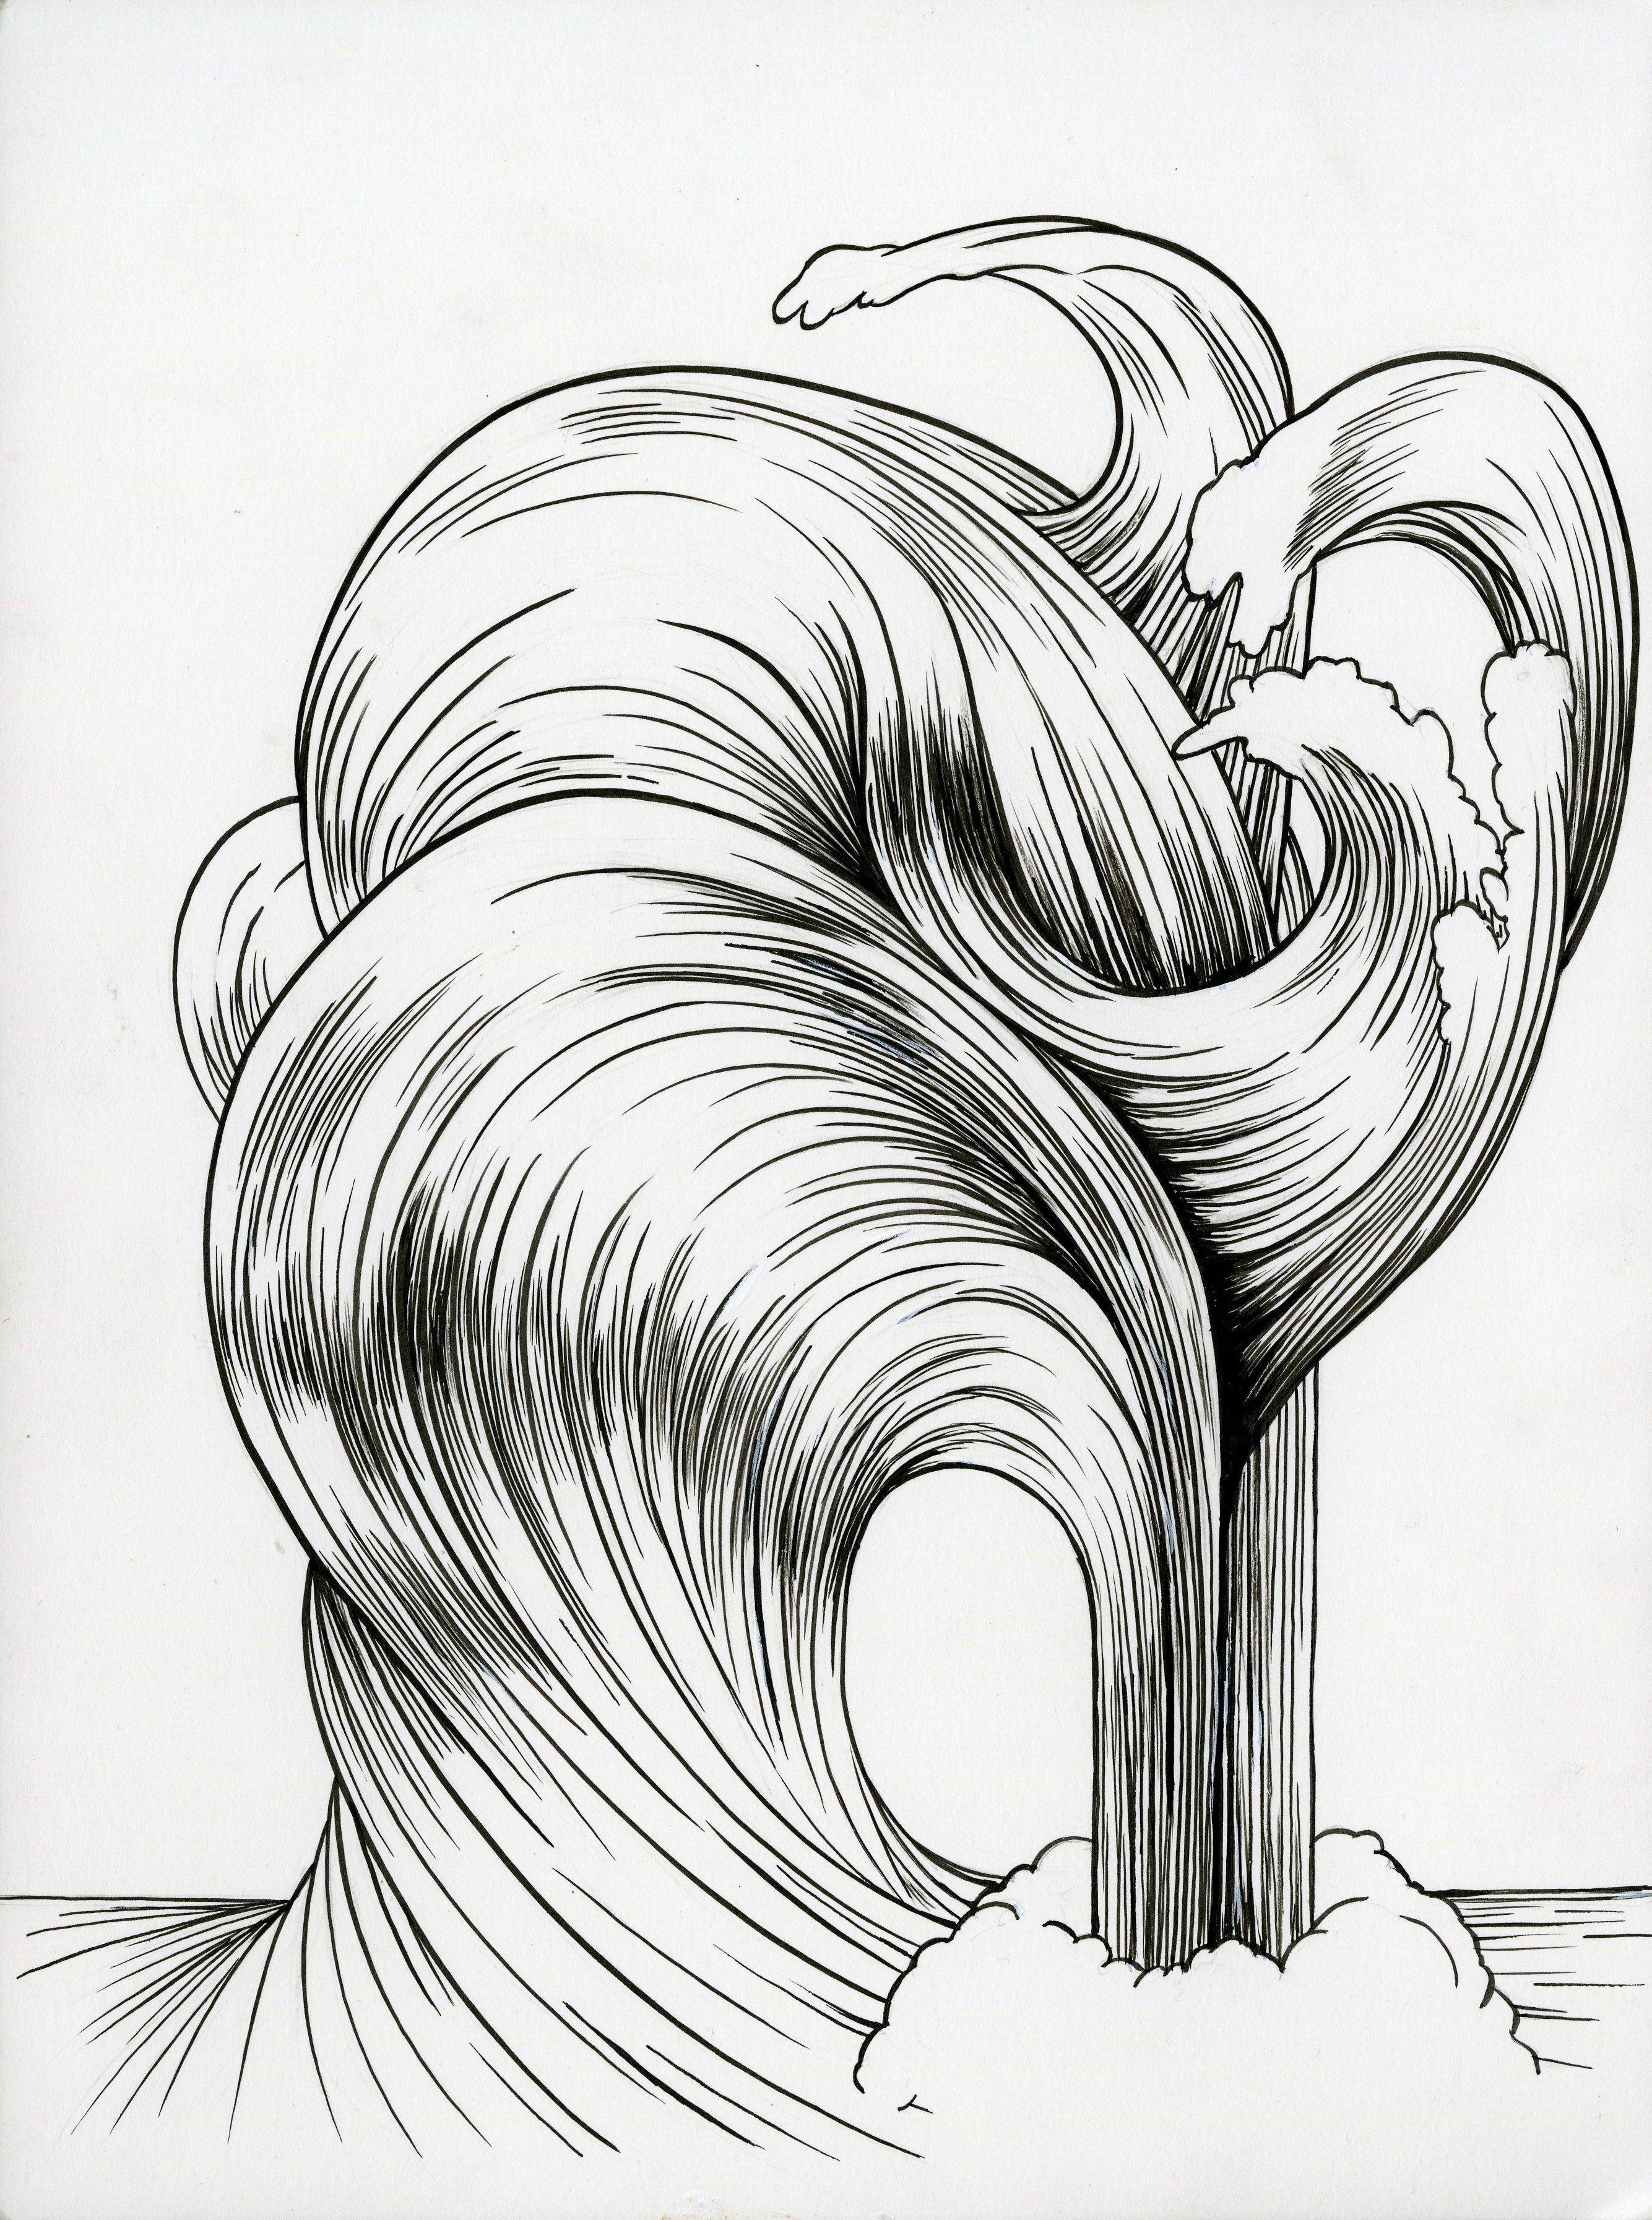 Jim Shaw, Forces of Nature / Hair, 2011 - © Jim Shaw. Courtesy the artist and Gagosian